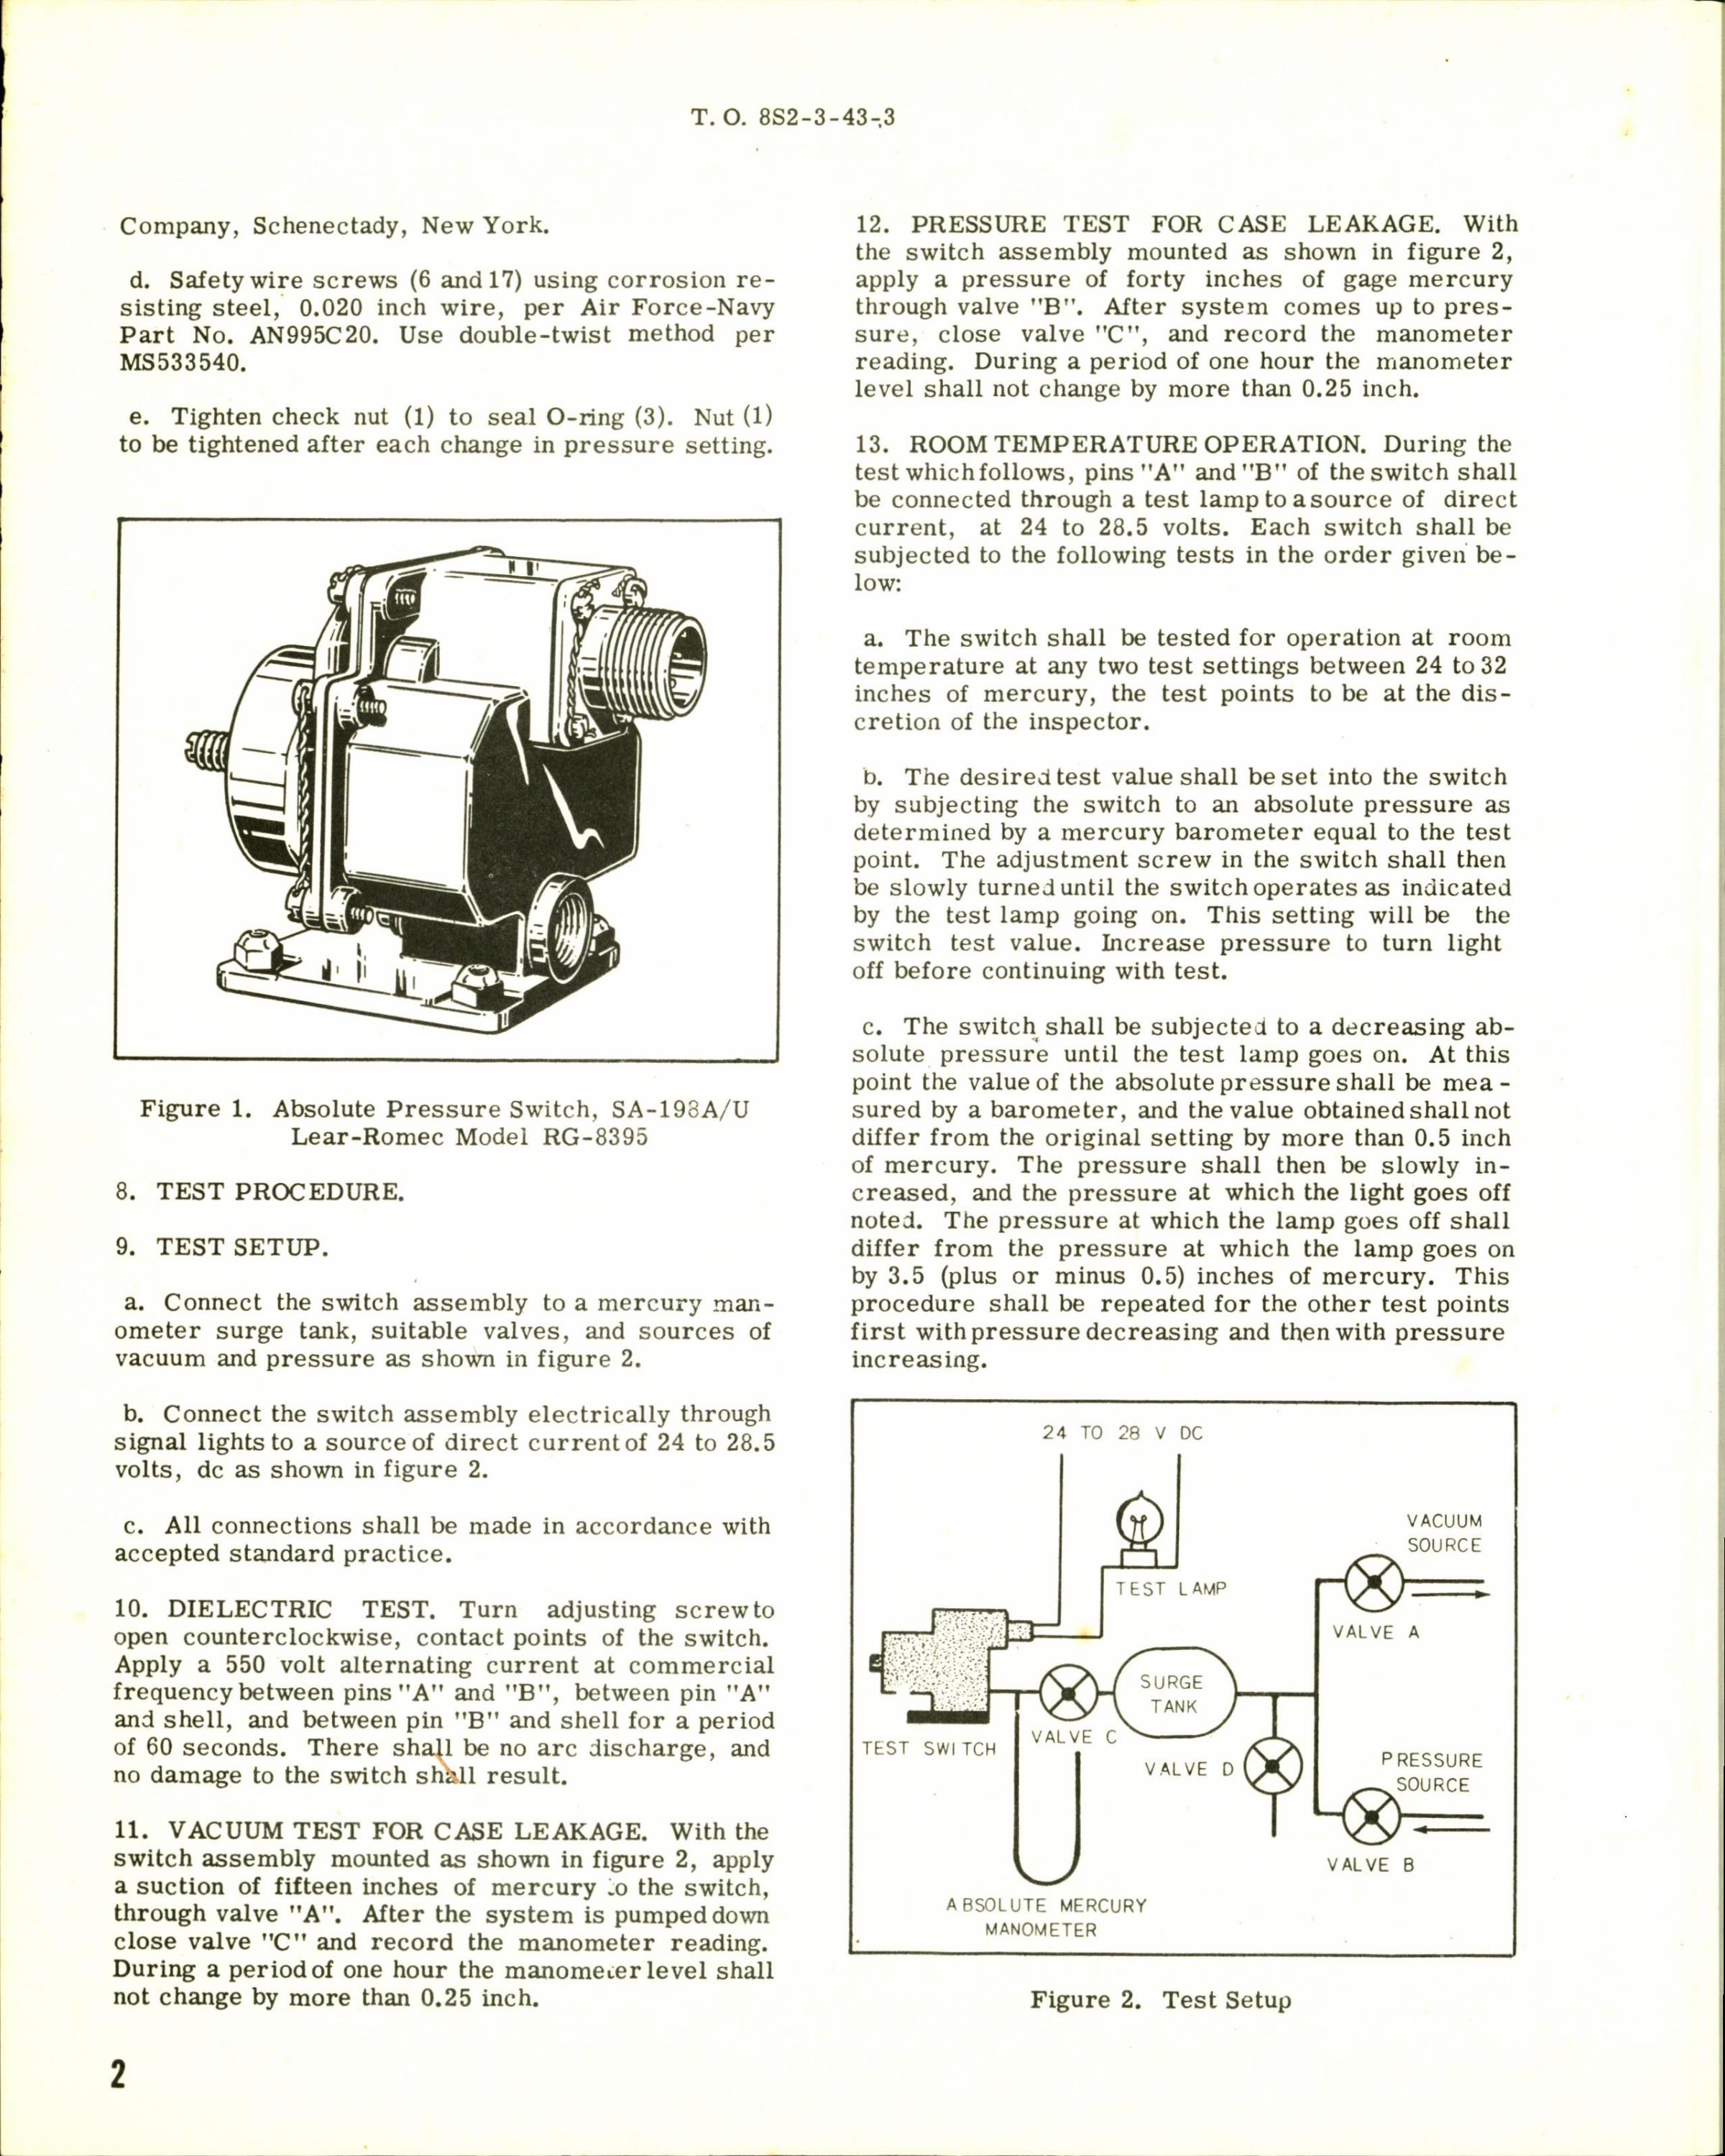 Sample page 2 from AirCorps Library document: Overhaul Instructions with Parts Breakdown for Absolute Pressure Switch SA-198A-U